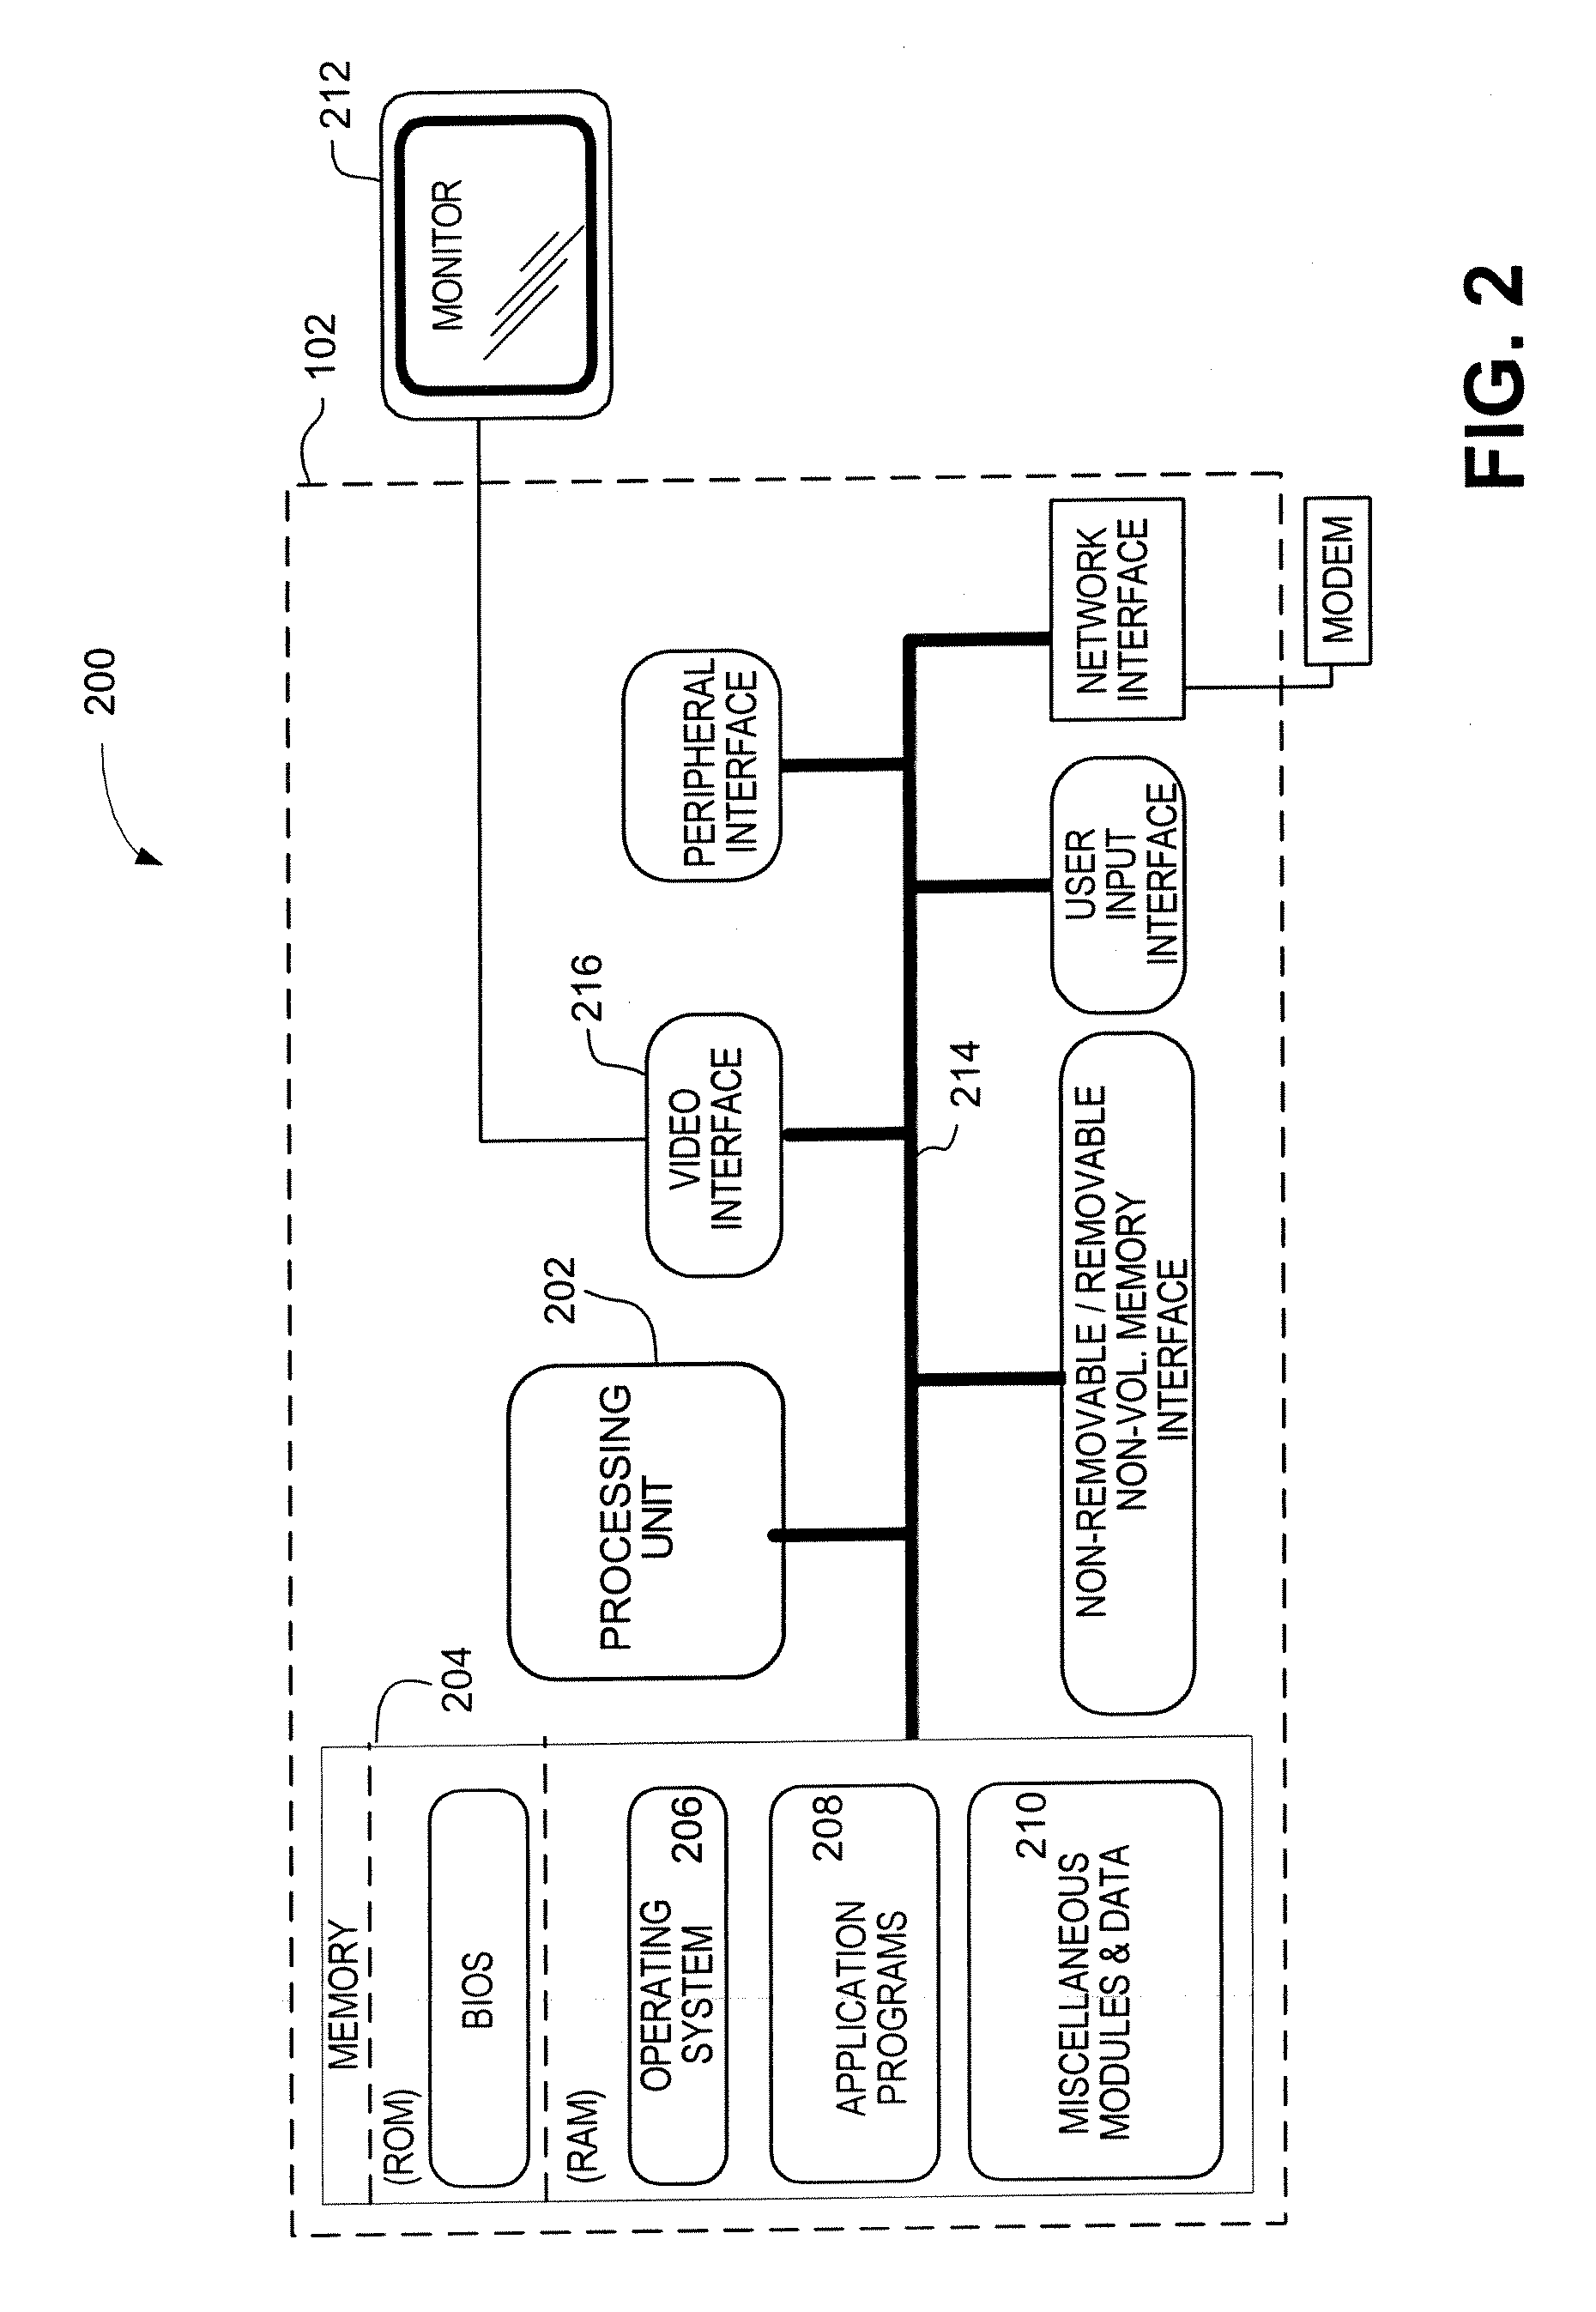 Method and apparatus for providing integrated management of point-of-sale and accounts receivable